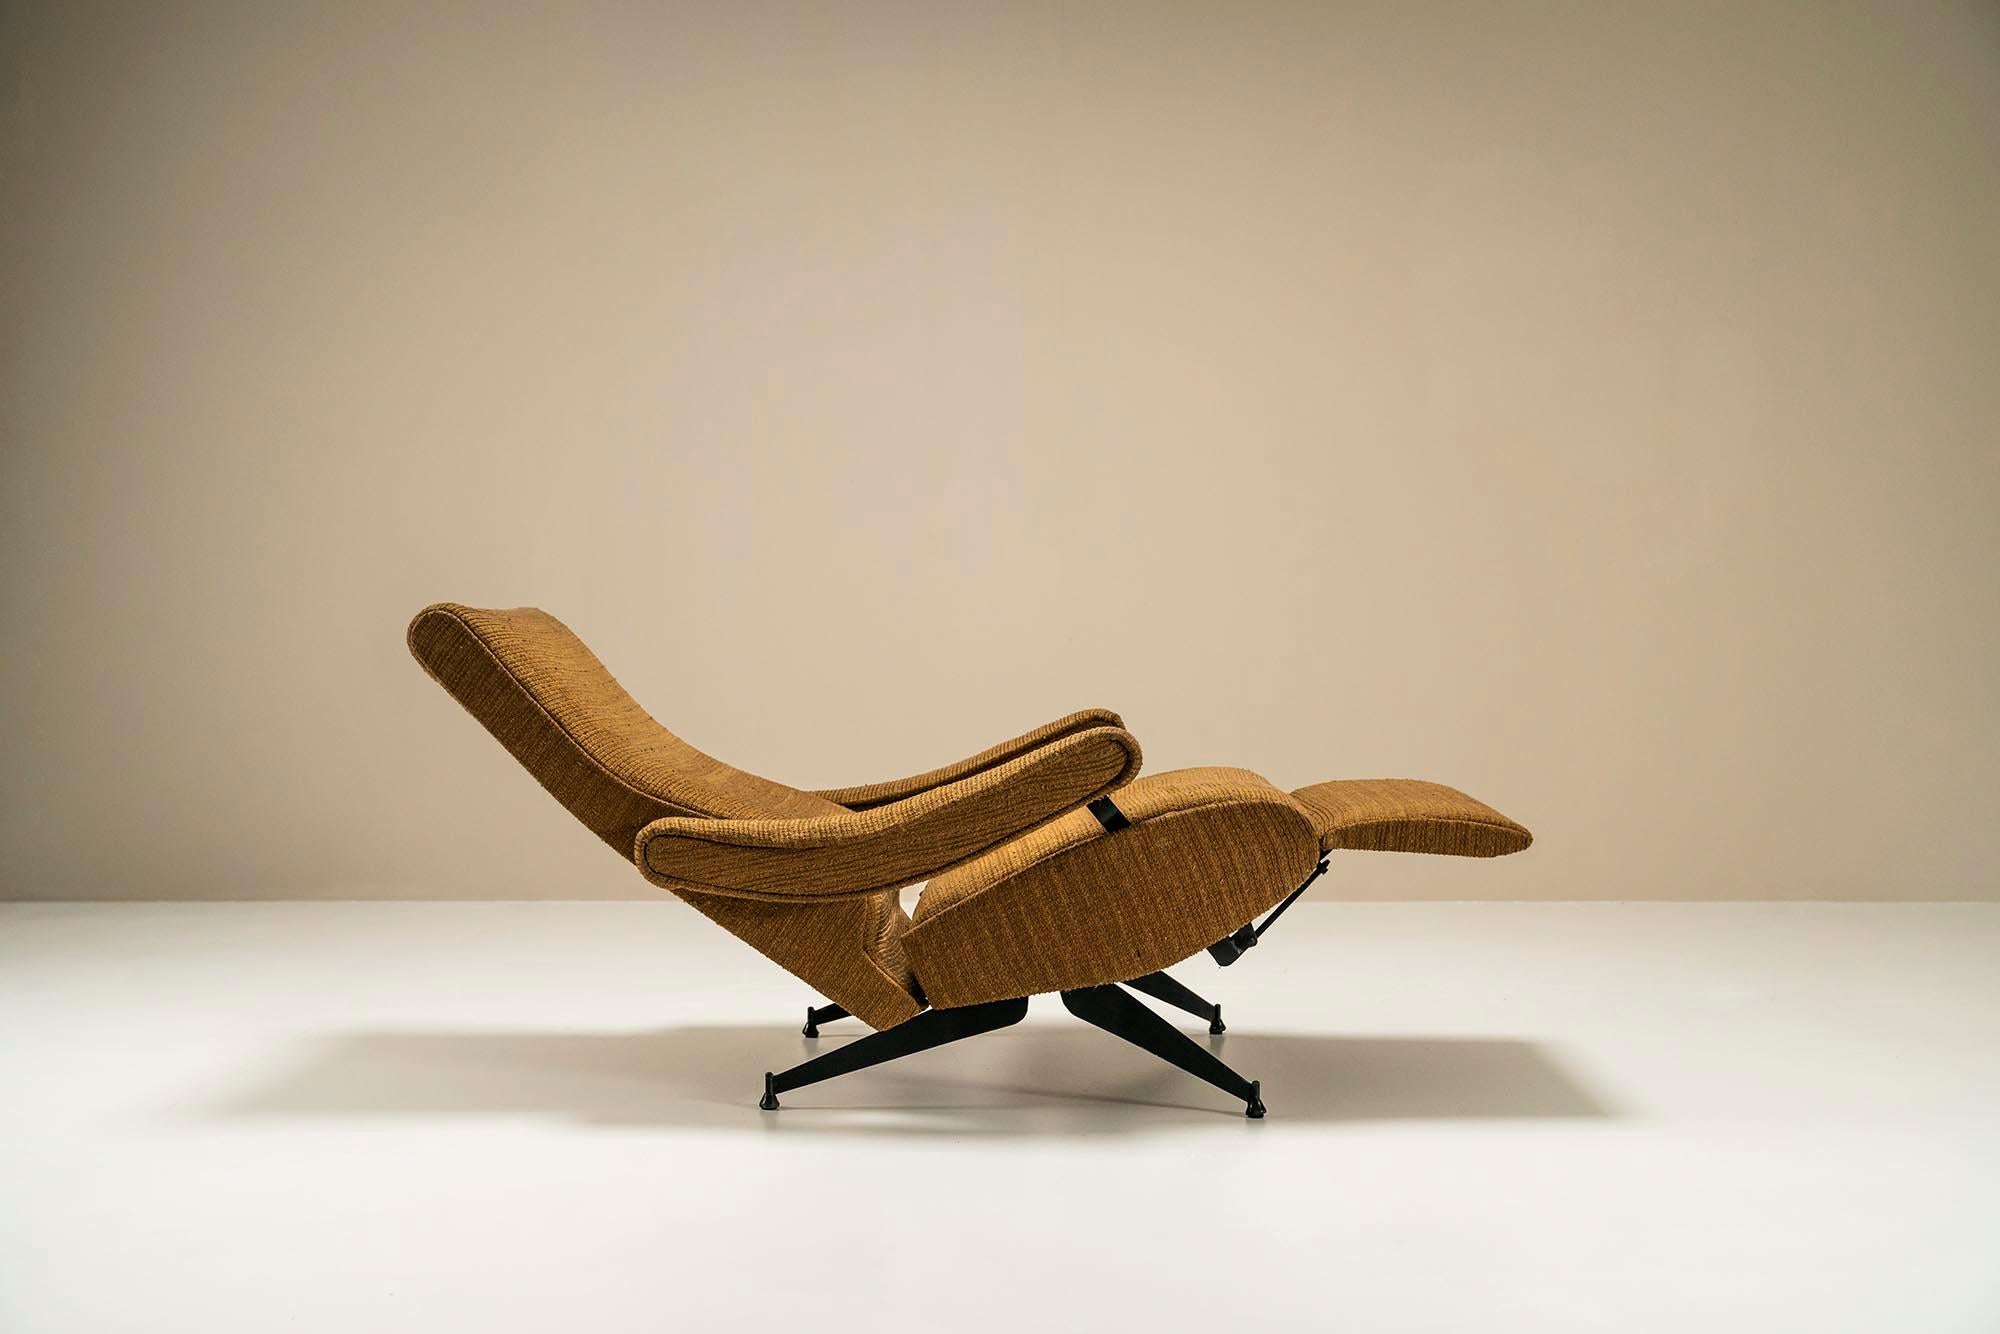 Reclining Armchair in Steel and Fabric by Nello Pini for Novarredo, Italy, 1959 For Sale 2